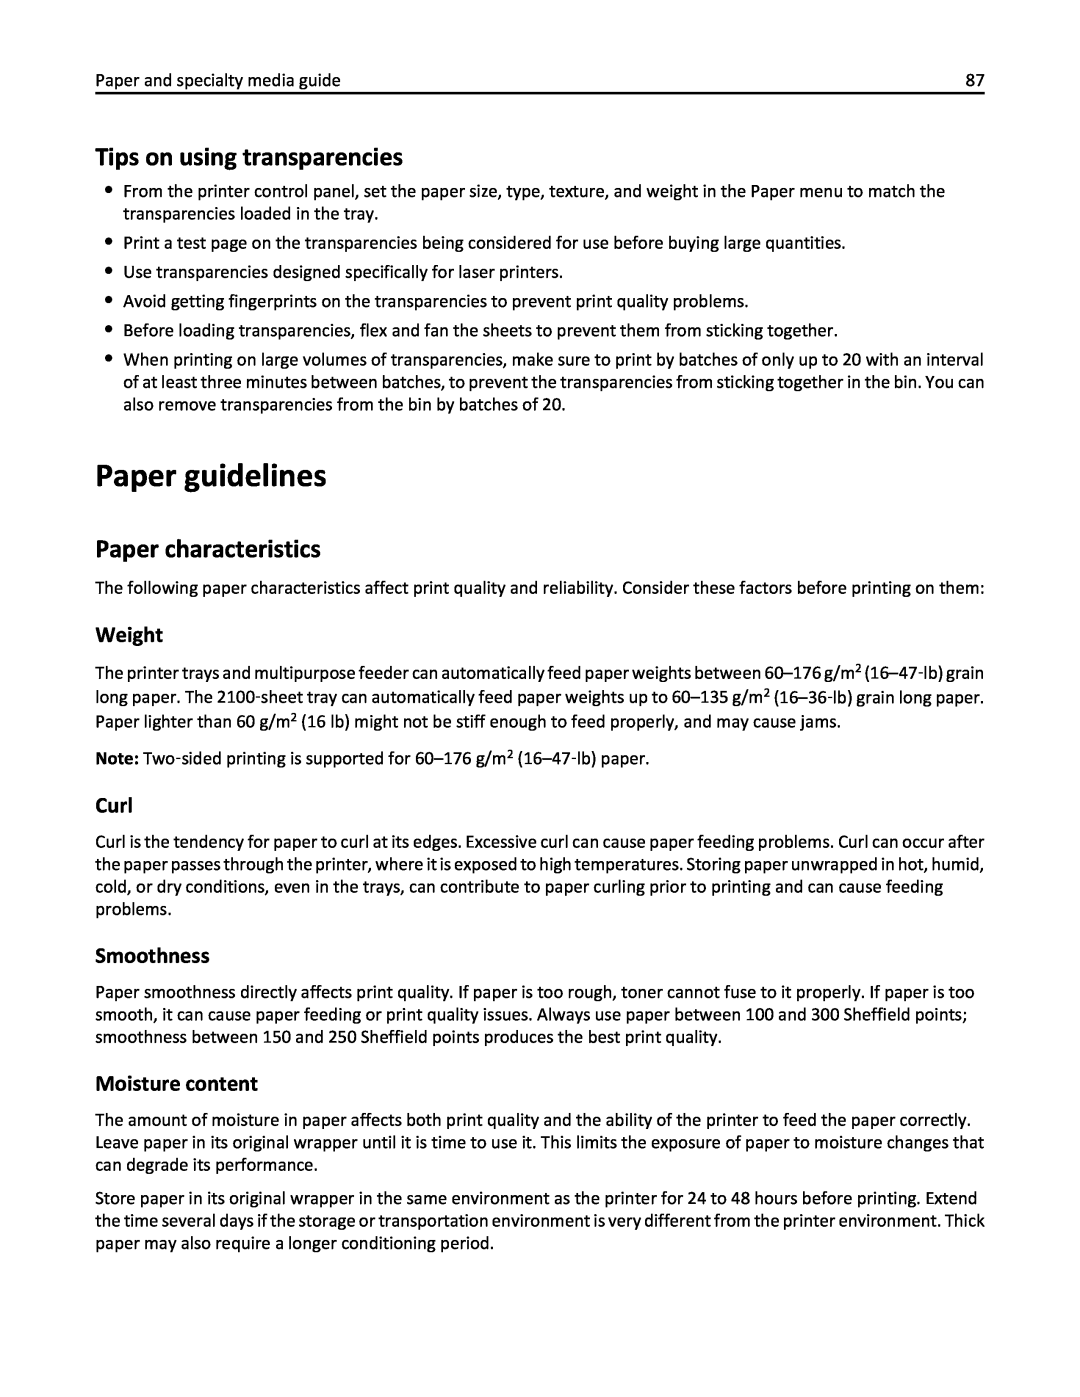 Lexmark 24T7310, MX710DHE Paper guidelines, Tips on using transparencies, Paper characteristics, Weight, Curl, Smoothness 